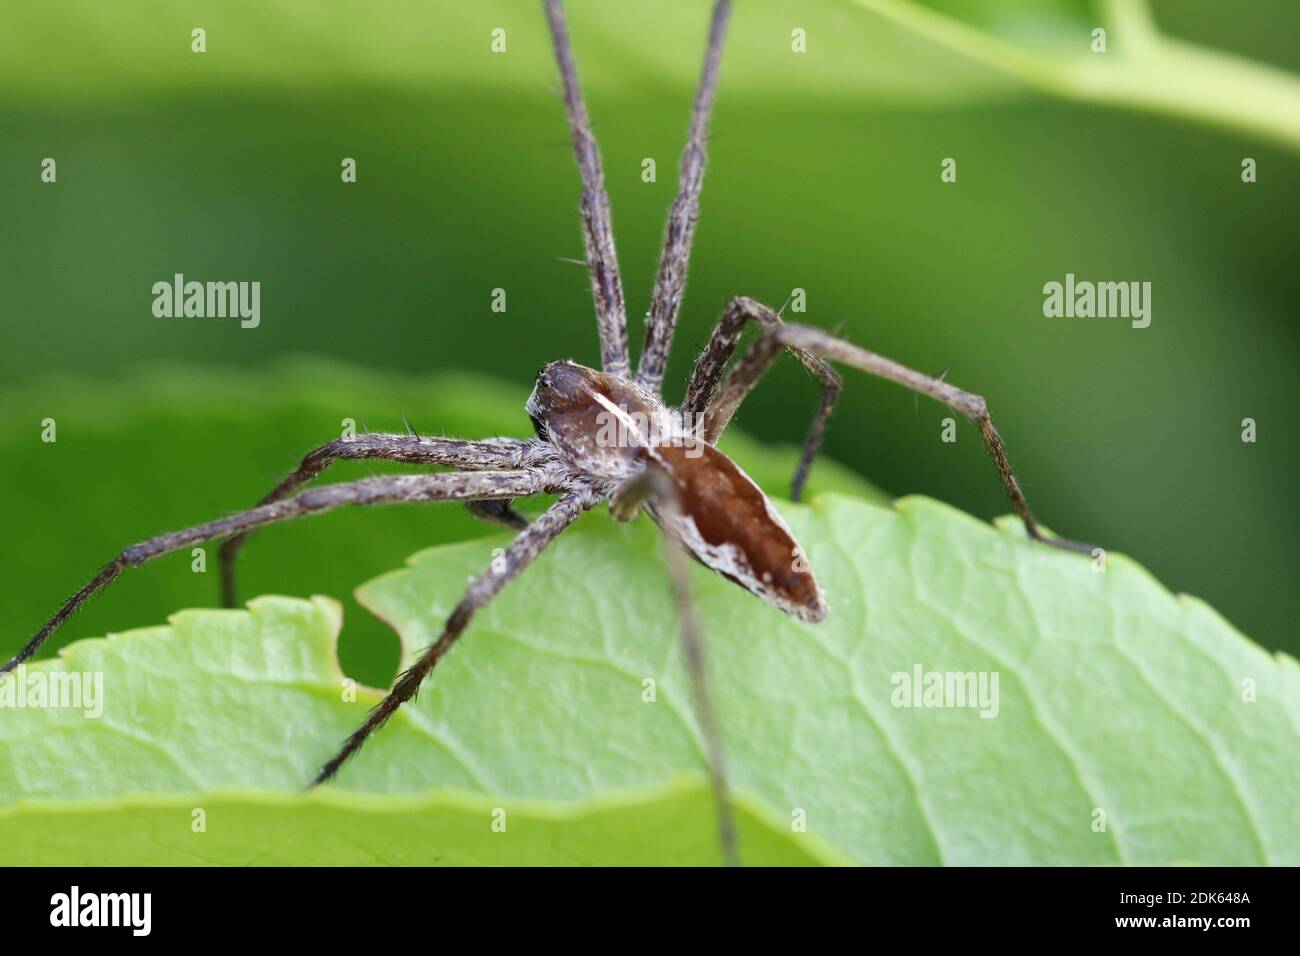 The nursery web spider, Pisaura Mirabilis, is a spider of the family Pisauridae. This picture was taken with a macro lens in a backyard in Belgium. Stock Photo